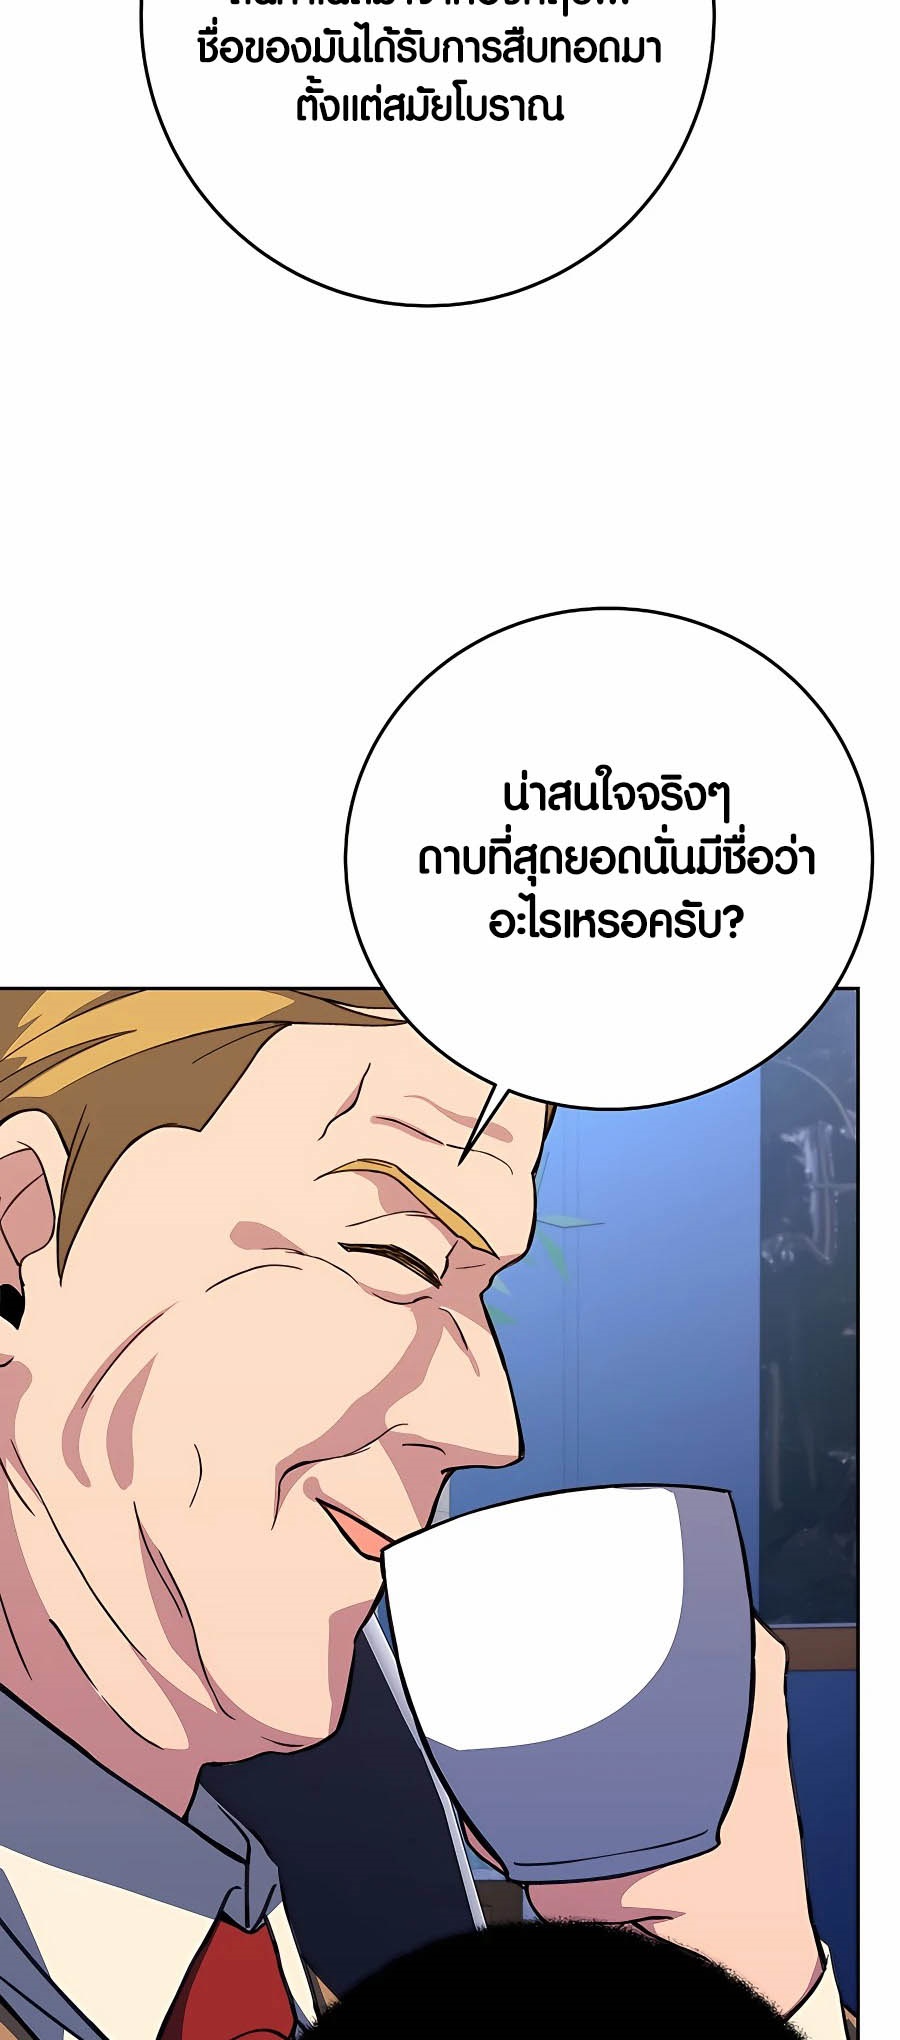 à¸­à¹ˆà¸²à¸™à¸¡à¸±à¸™à¸®à¸§à¸² à¹€à¸£à¸·à¹ˆà¸­à¸‡ The Part Time Land of the Gods 56 24